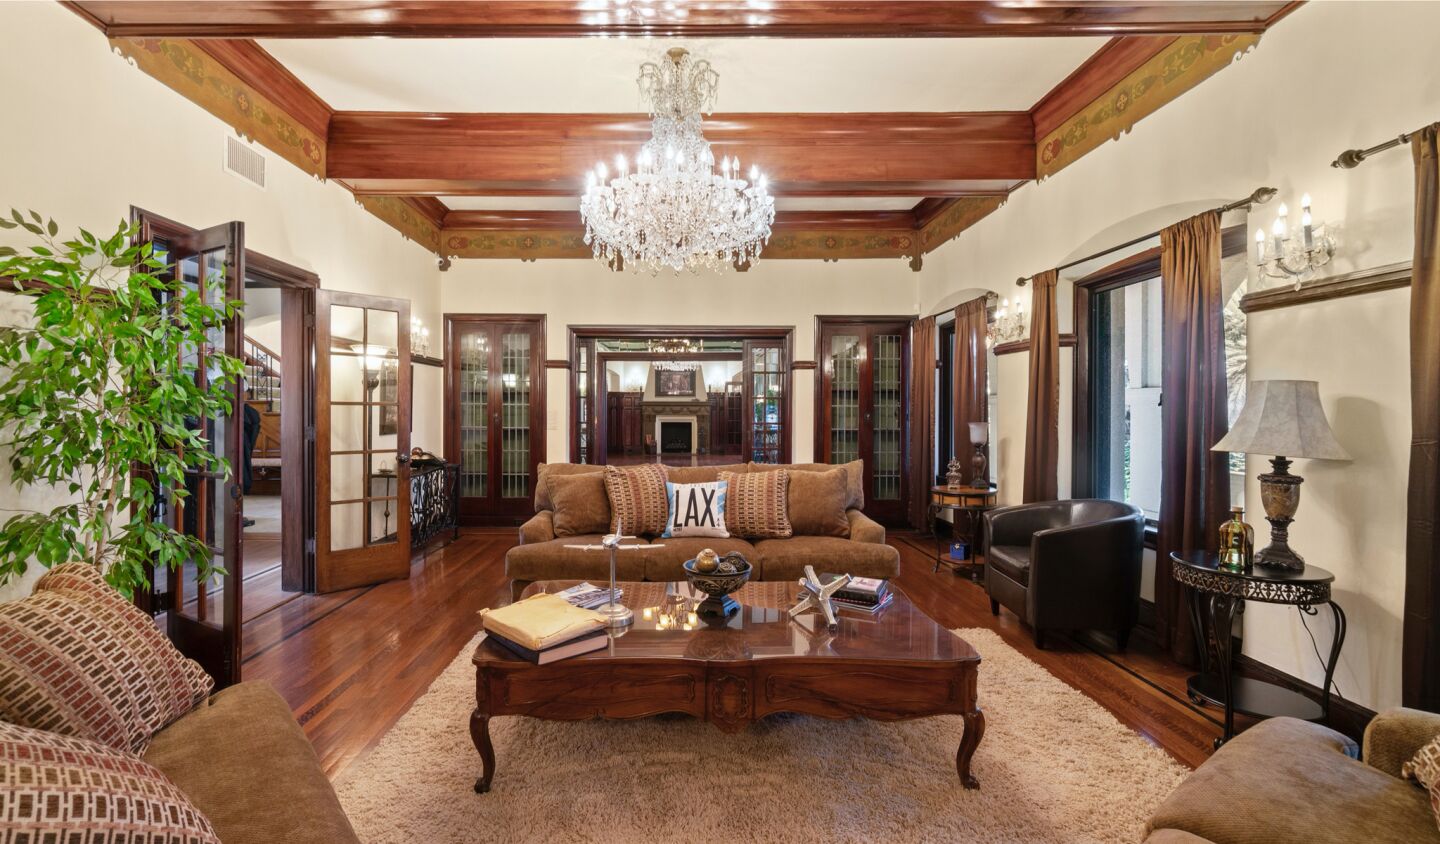 The formal living room.